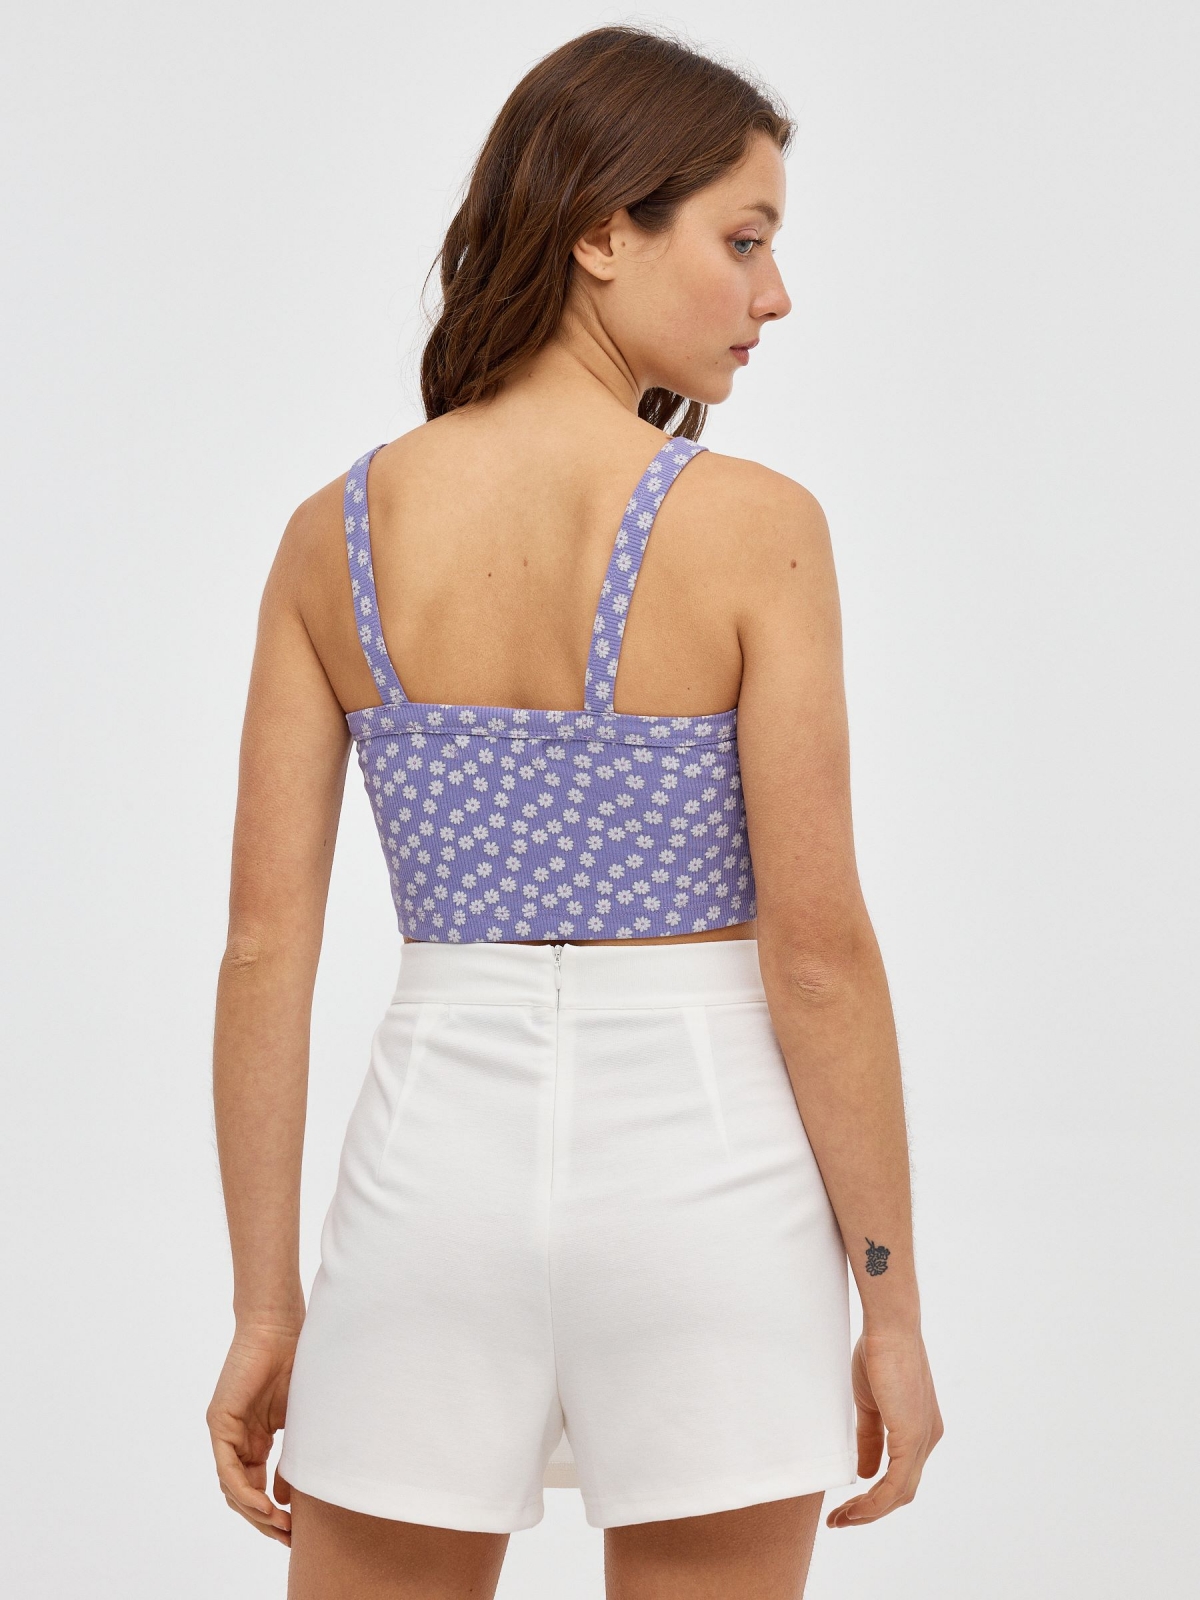 Crop top with daisies lilac middle back view